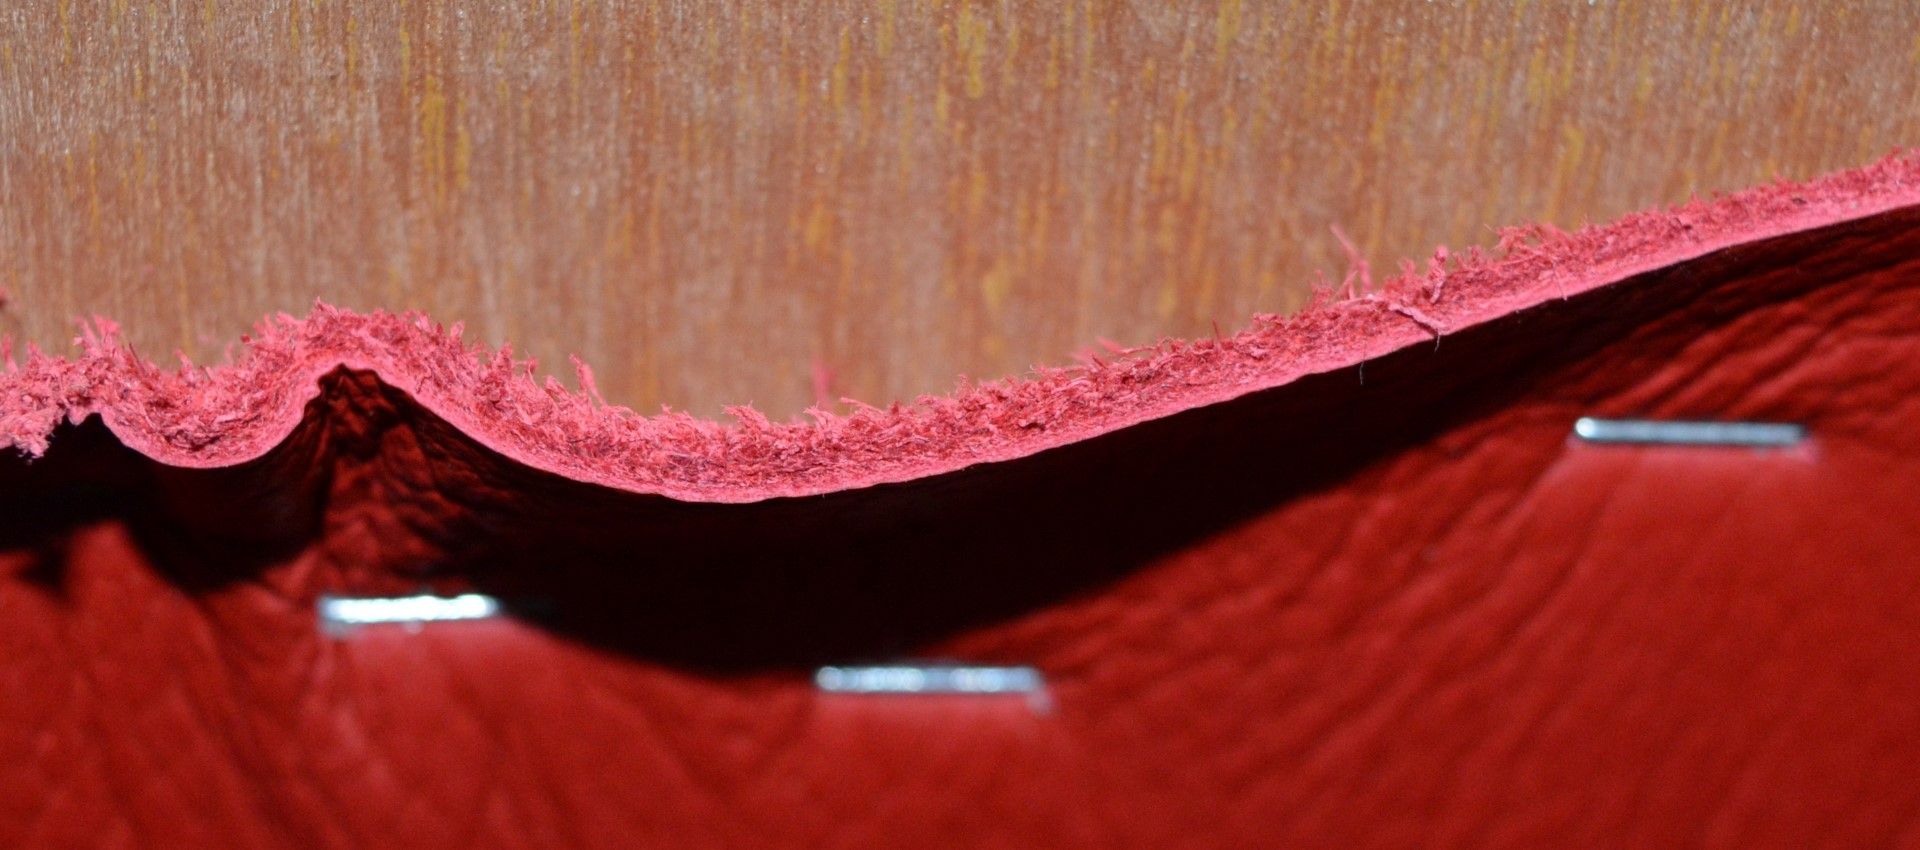 1 x High Back Single Seating Bench Upholstered in Red Leather - Sits upto Two People - High - Image 6 of 17